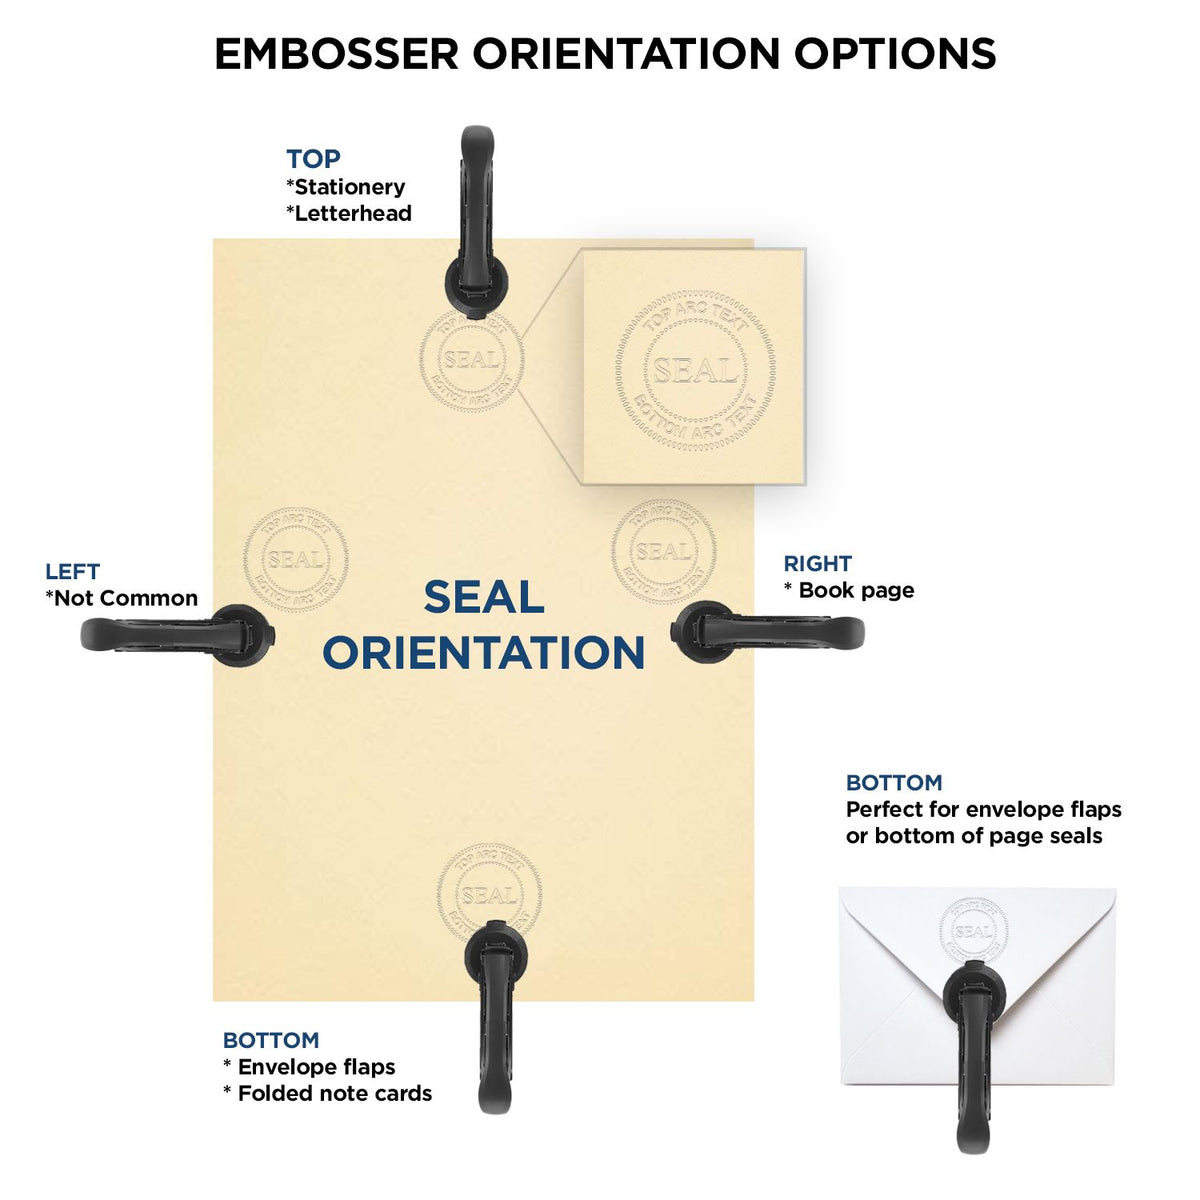 An infographic for the State of Colorado Long Reach Architectural Embossing Seal showing embosser orientation, this is showing examples of a top, bottom, right and left insert.